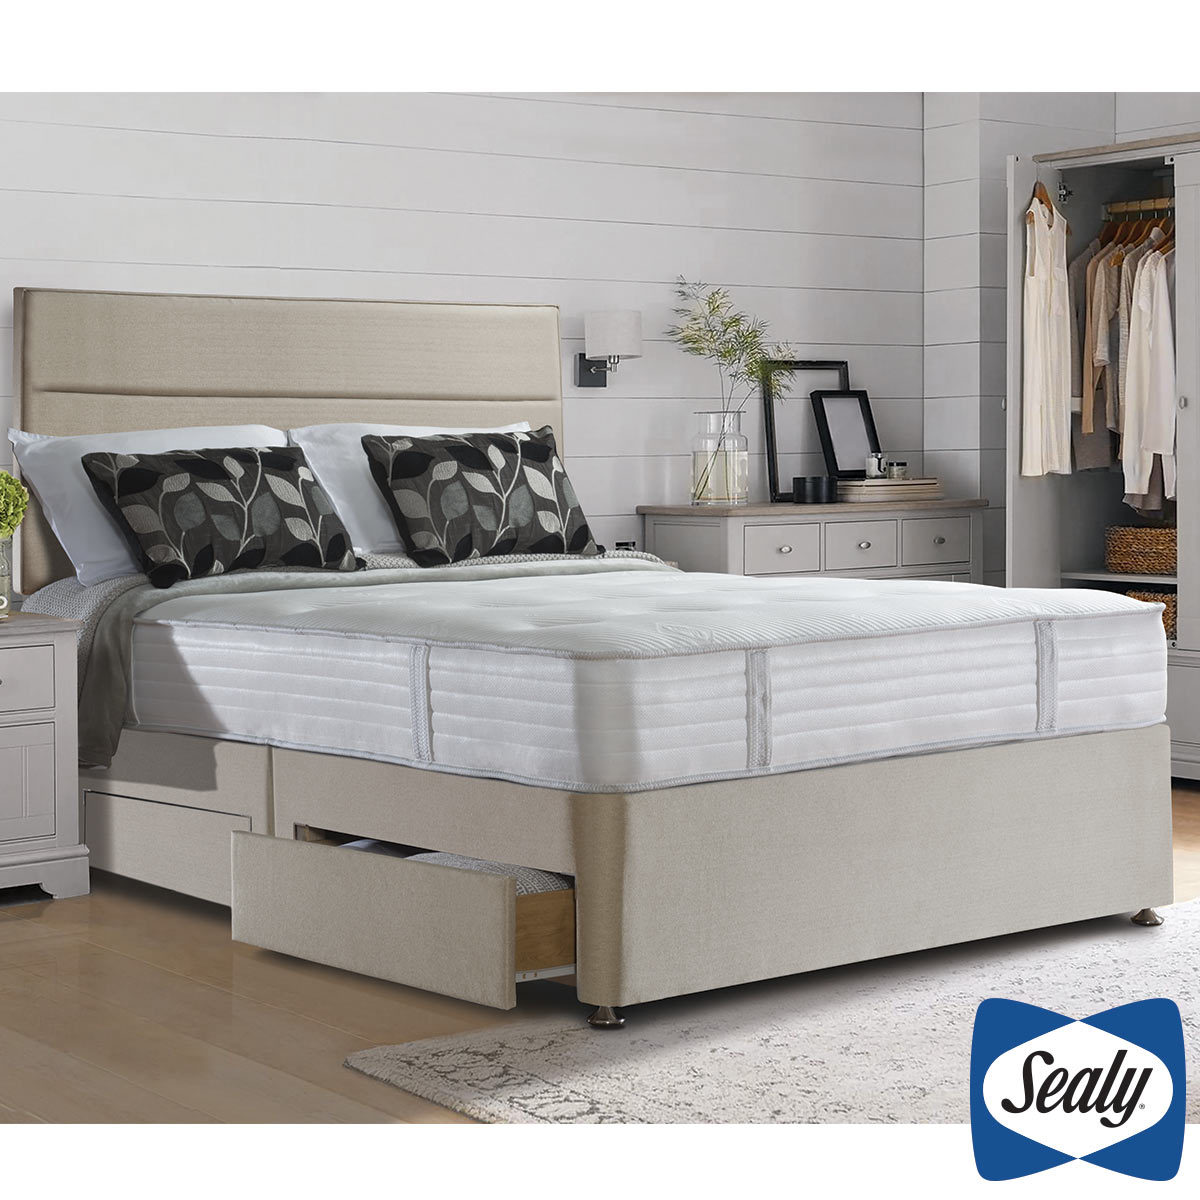 Sealy 1000 Deluxe Pocket Memory Mattress & Divan in Fawn, Double